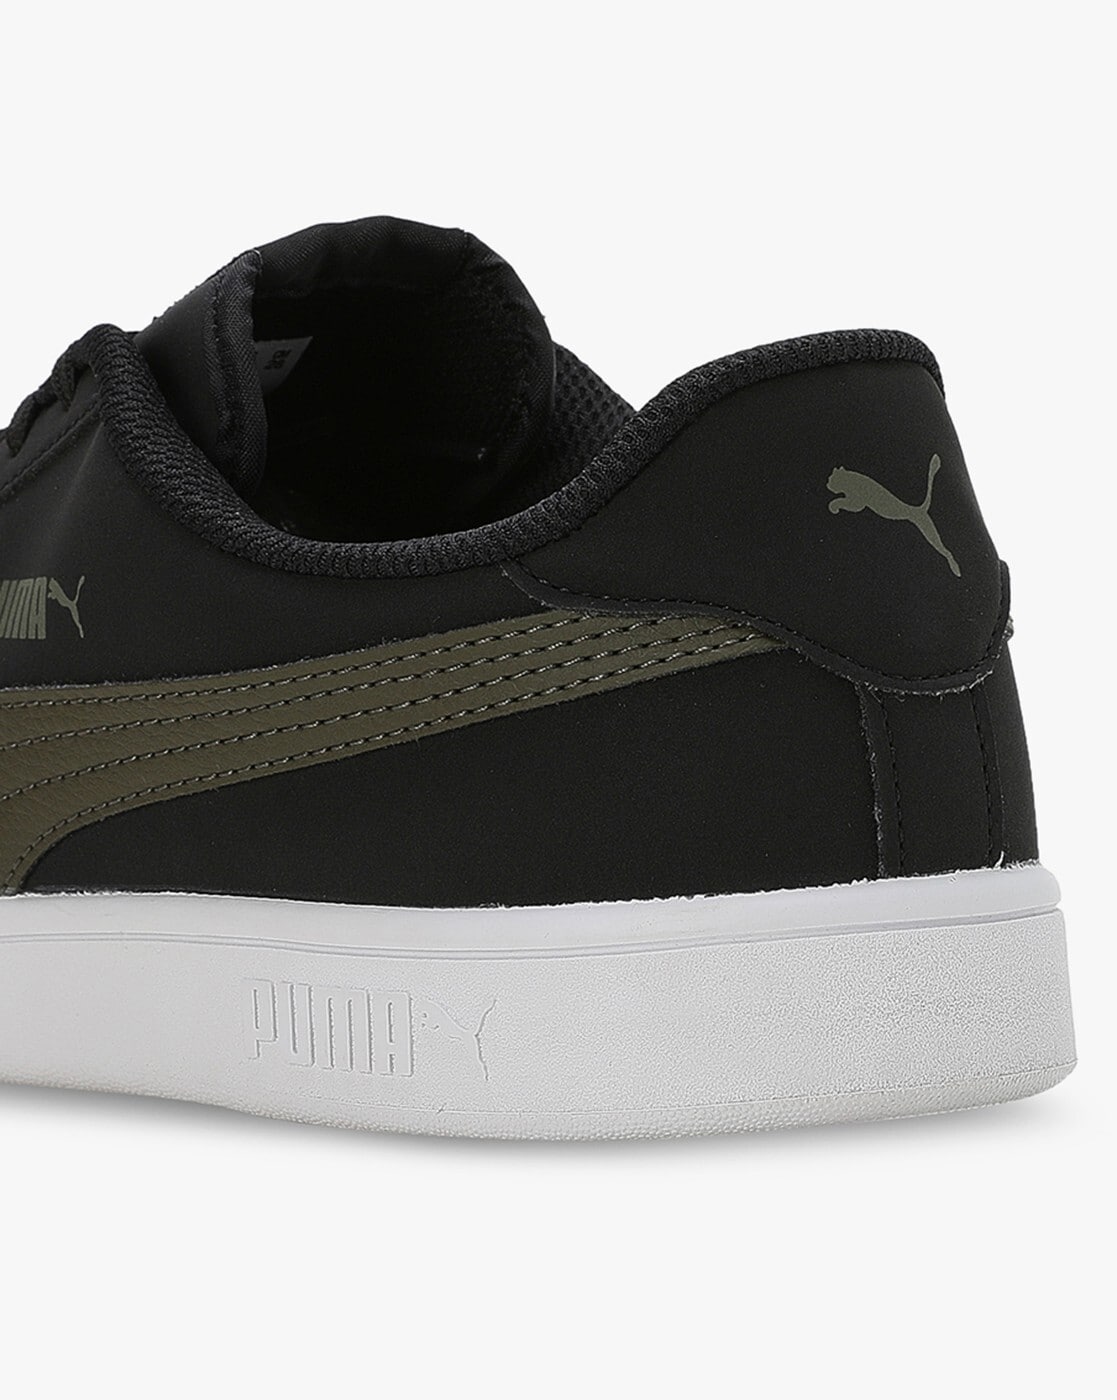 PUMA Smash v2 Sneakers For Men - Buy Puma Black-Puma Black Color PUMA Smash  v2 Sneakers For Men Online at Best Price - Shop Online for Footwears in  India